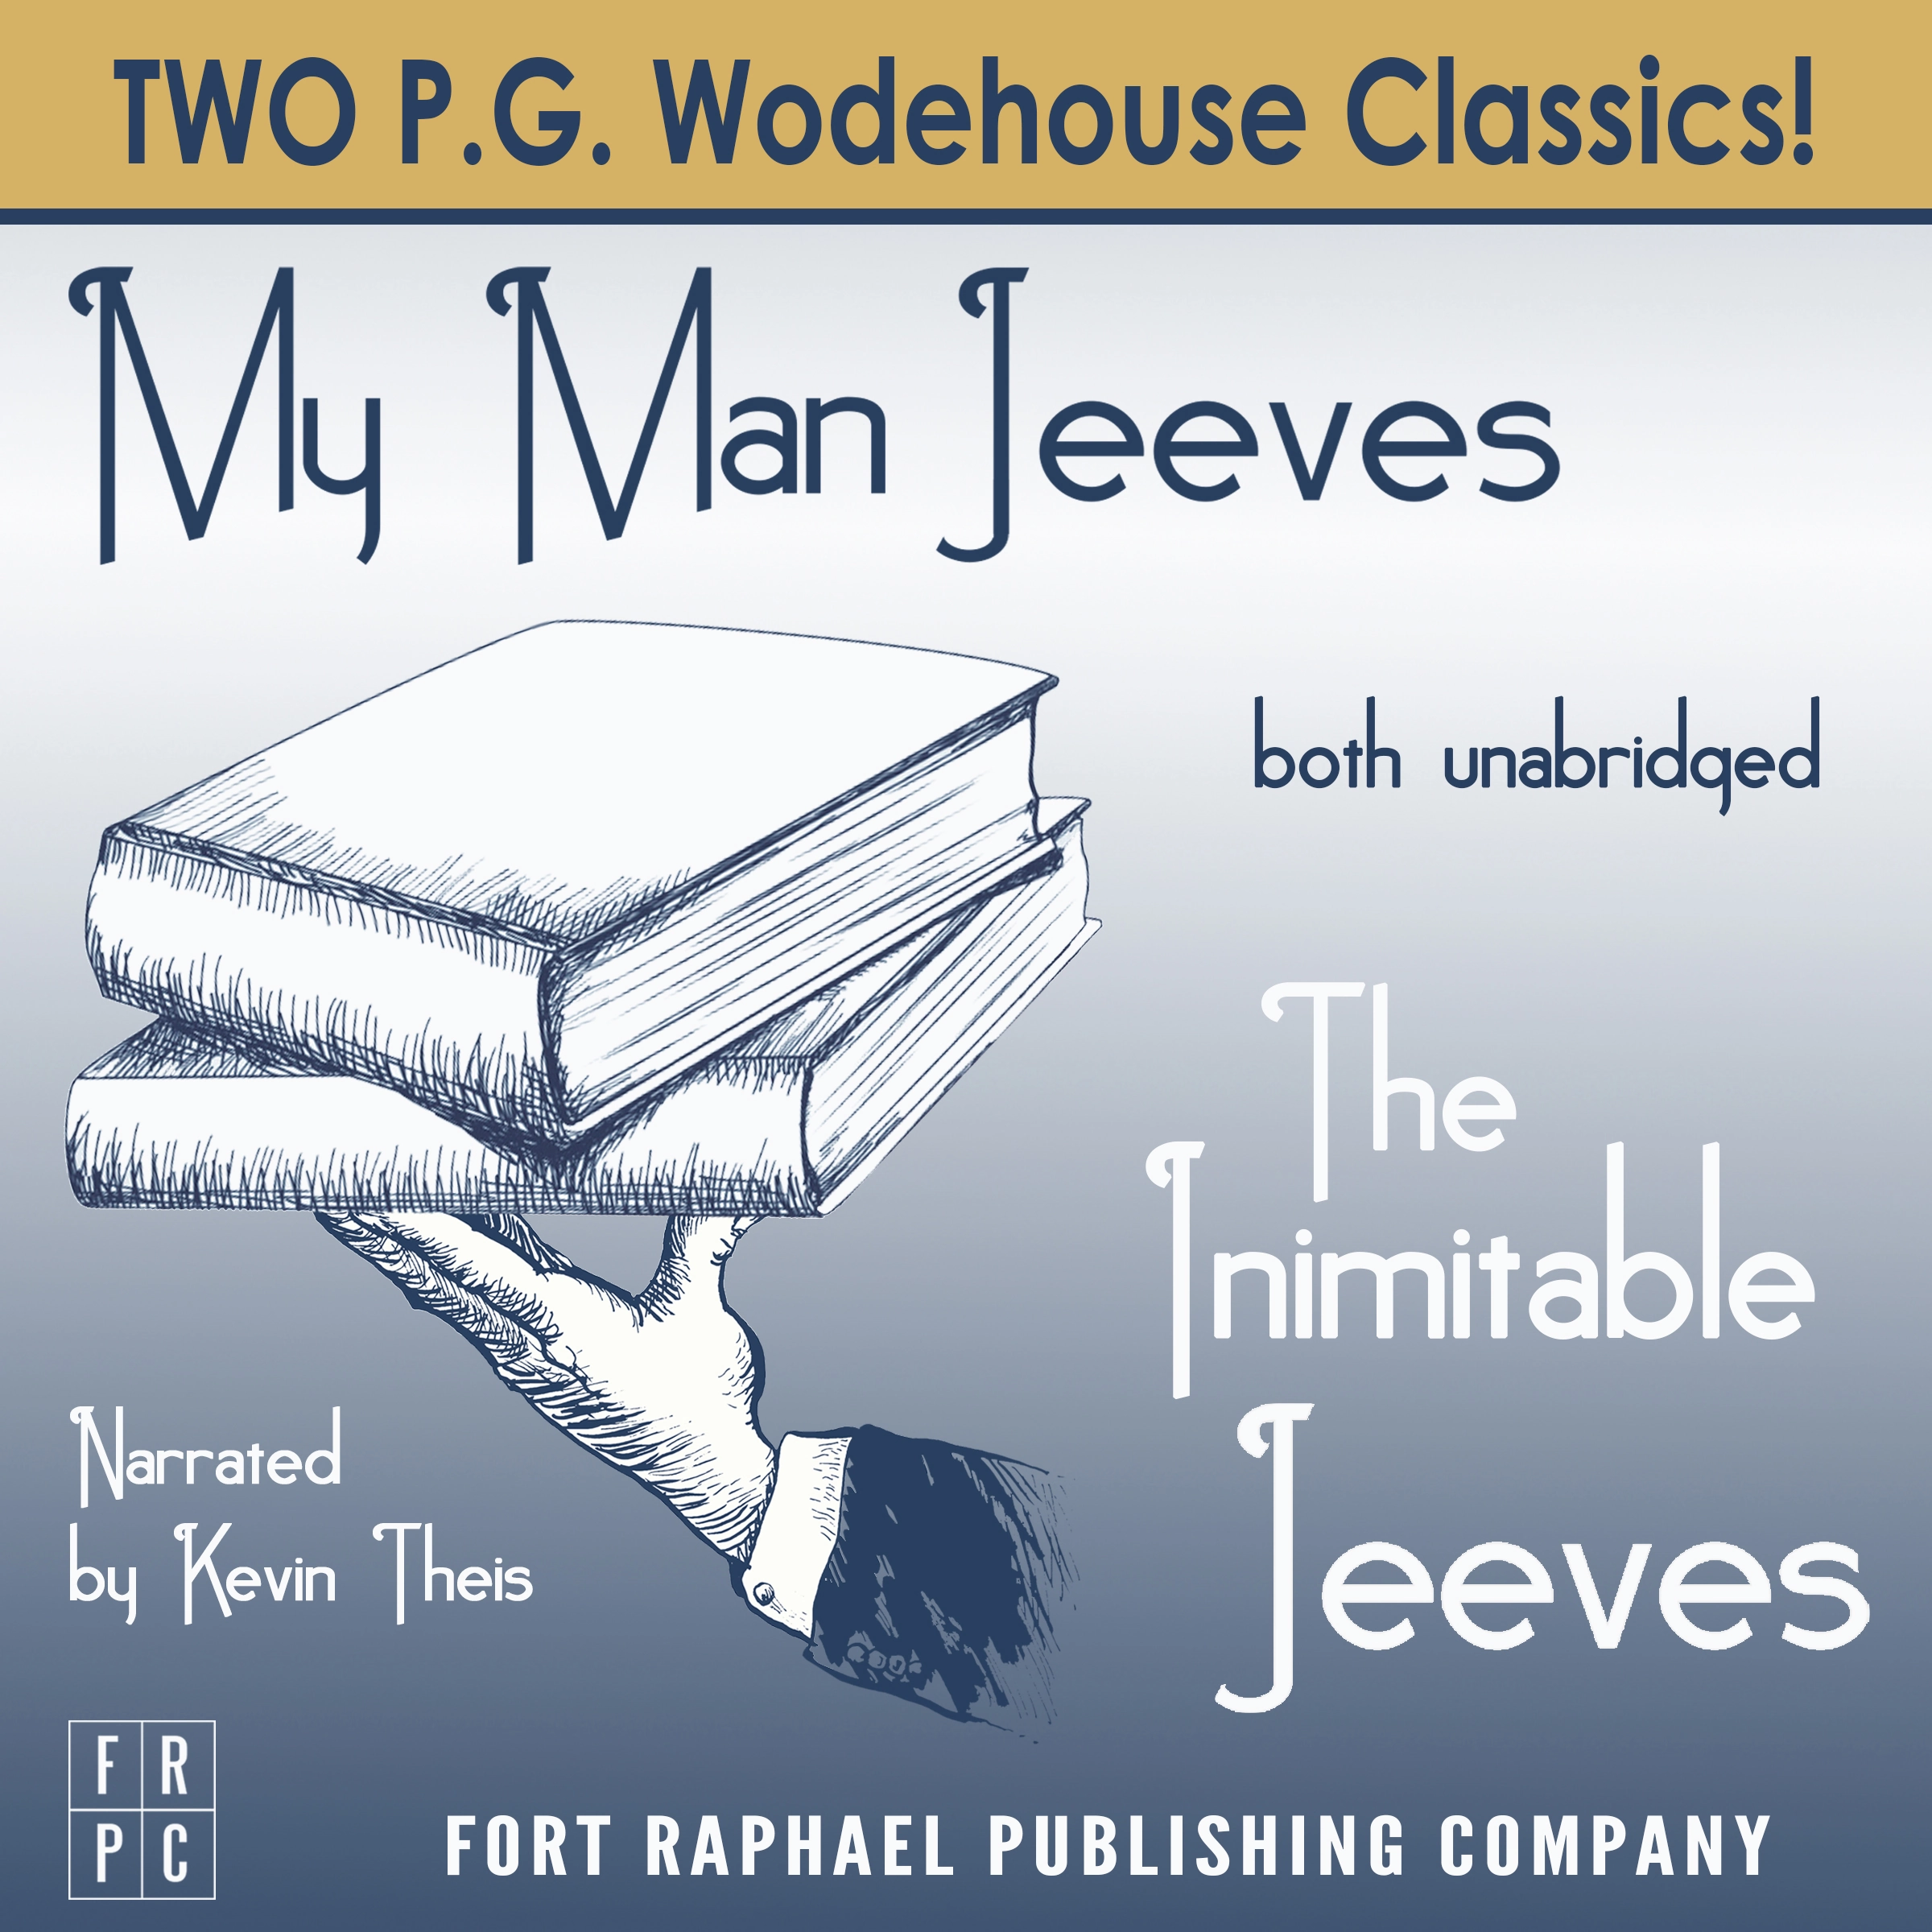 The Inimitable Jeeves and My Man Jeeves - Unabridged Audiobook by P.G. Wodehouse